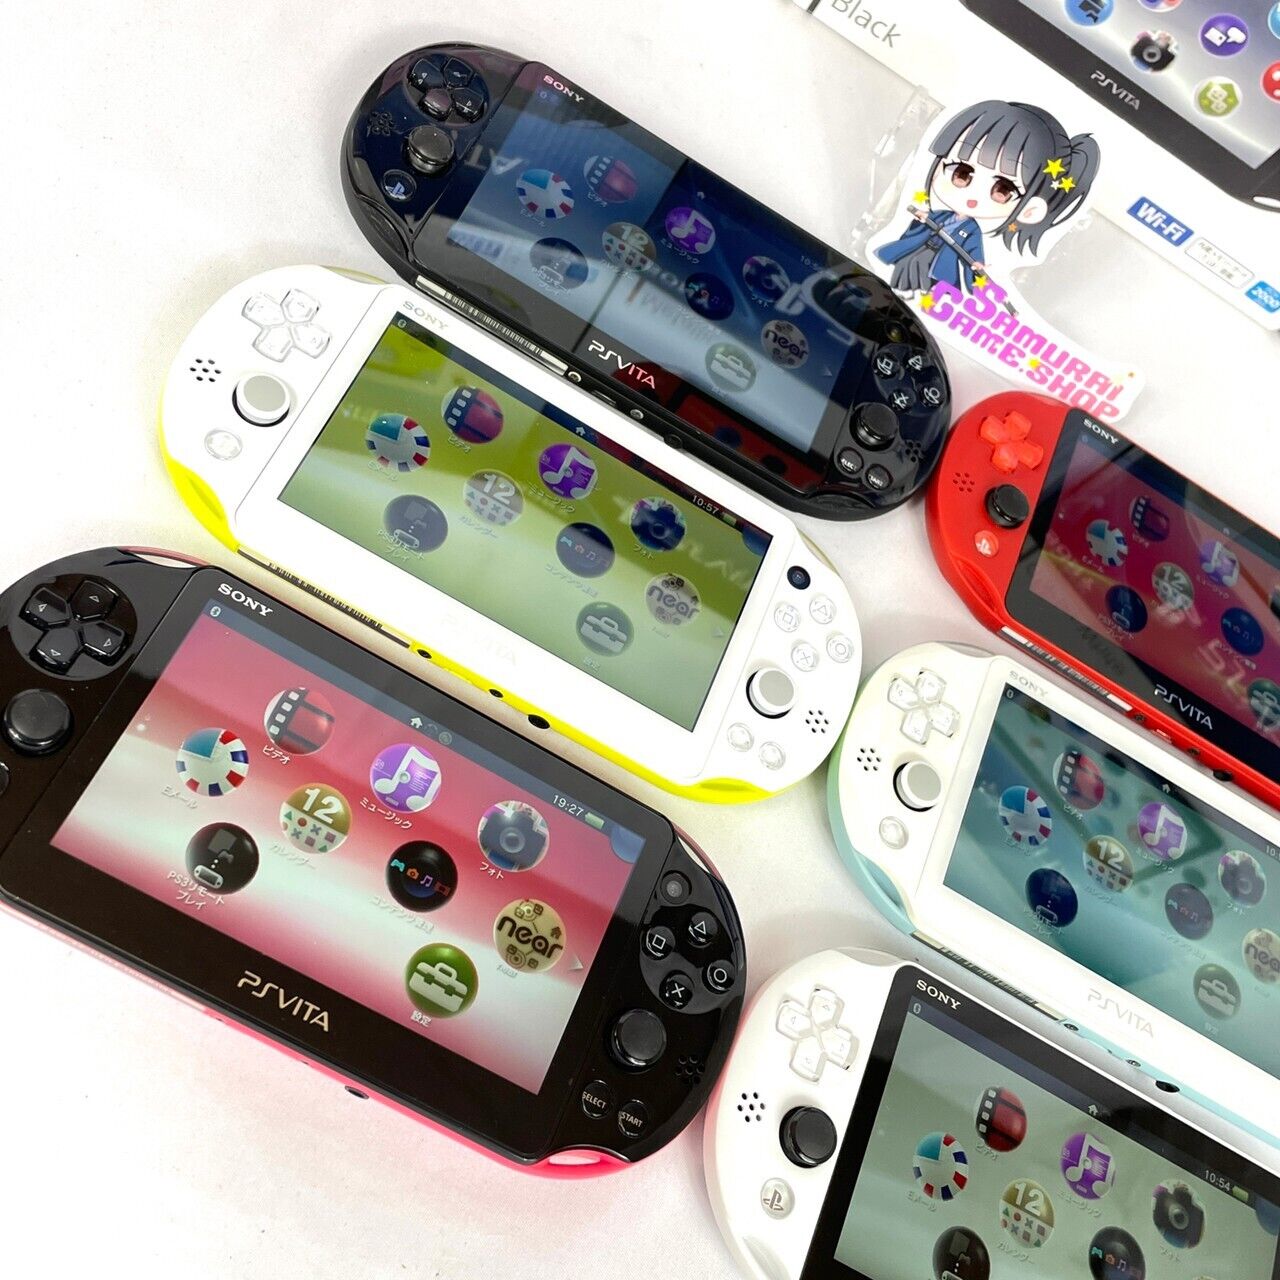 PS Vita PCH-2000 Sony Playstation Console Only Various Colors Excellent Japan